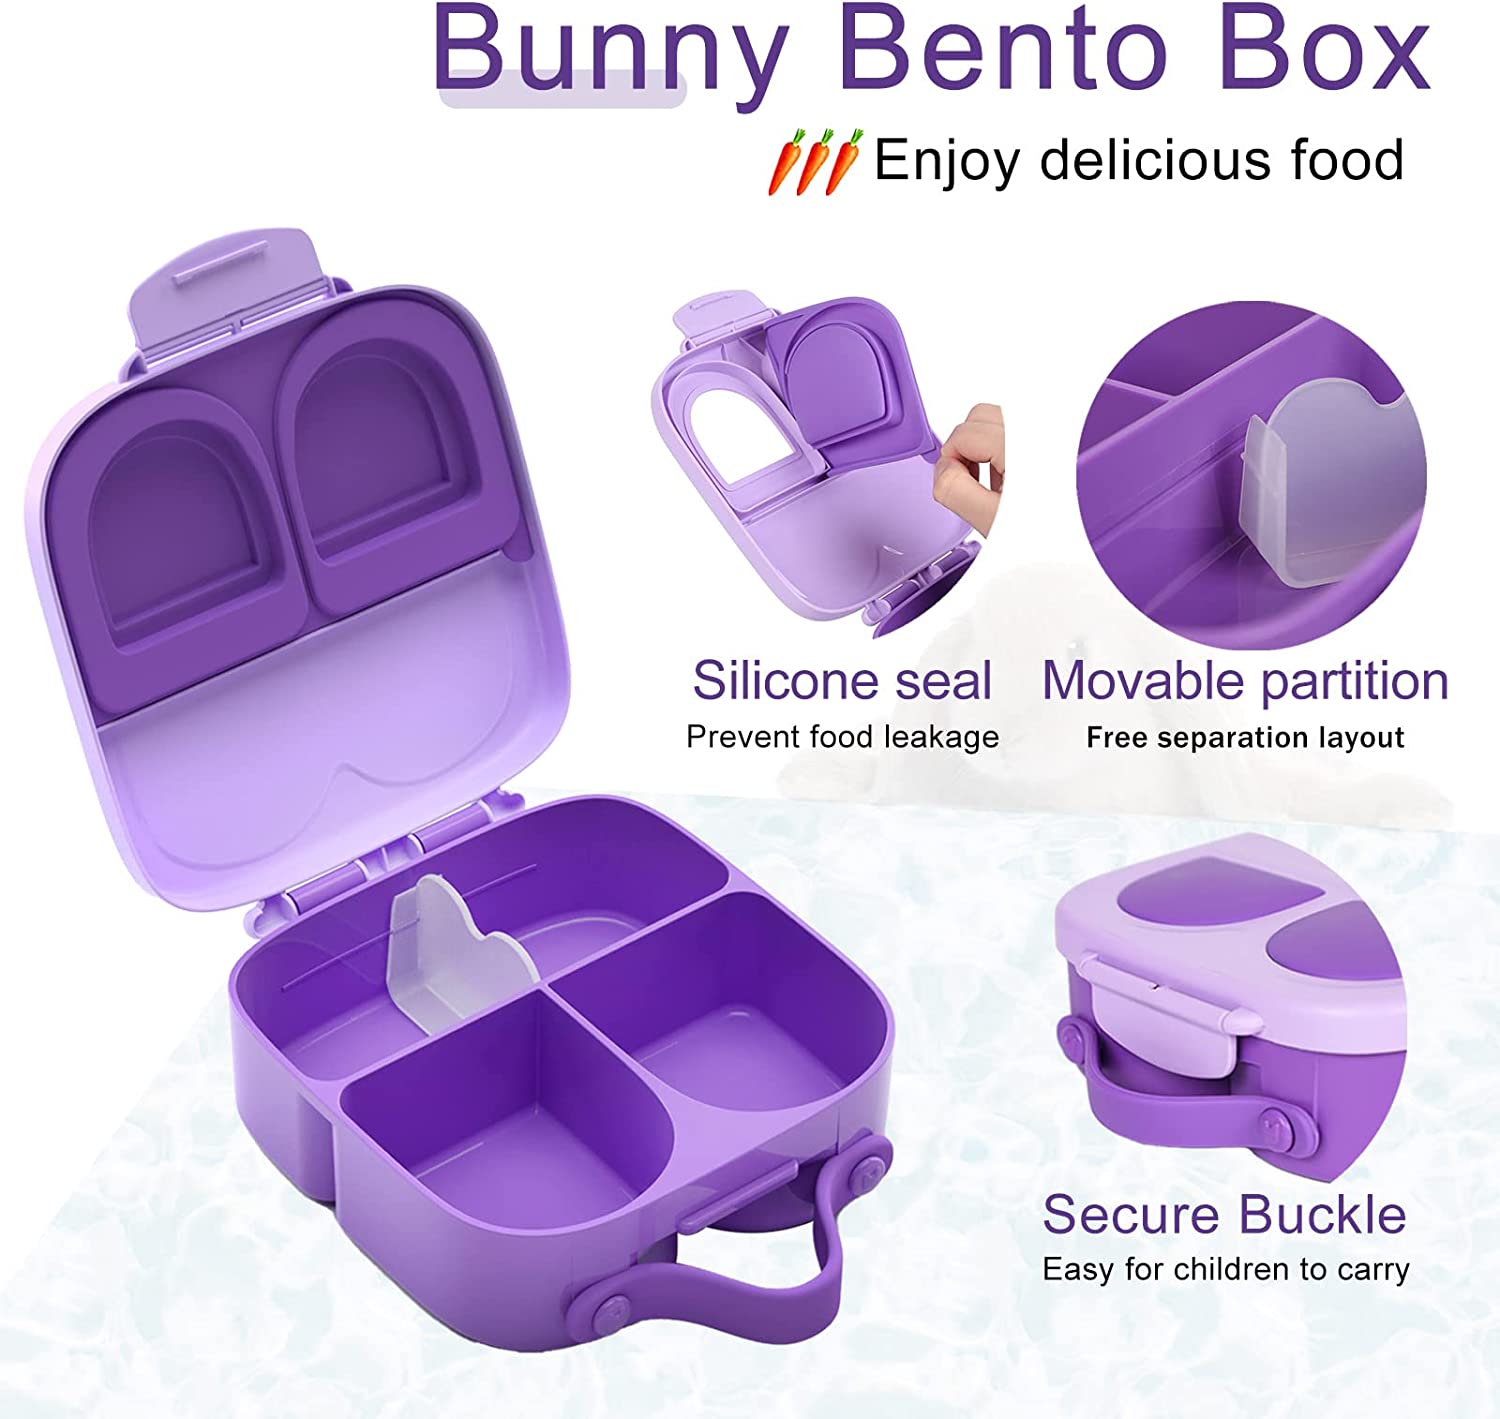 Snack Attack Bento Box or Lunch Box for Kids 4 & 6 Conertible Compartments  | Portion Lunch Box | Food Graded Materials BPA FREE & LEAK PROOF| Made of